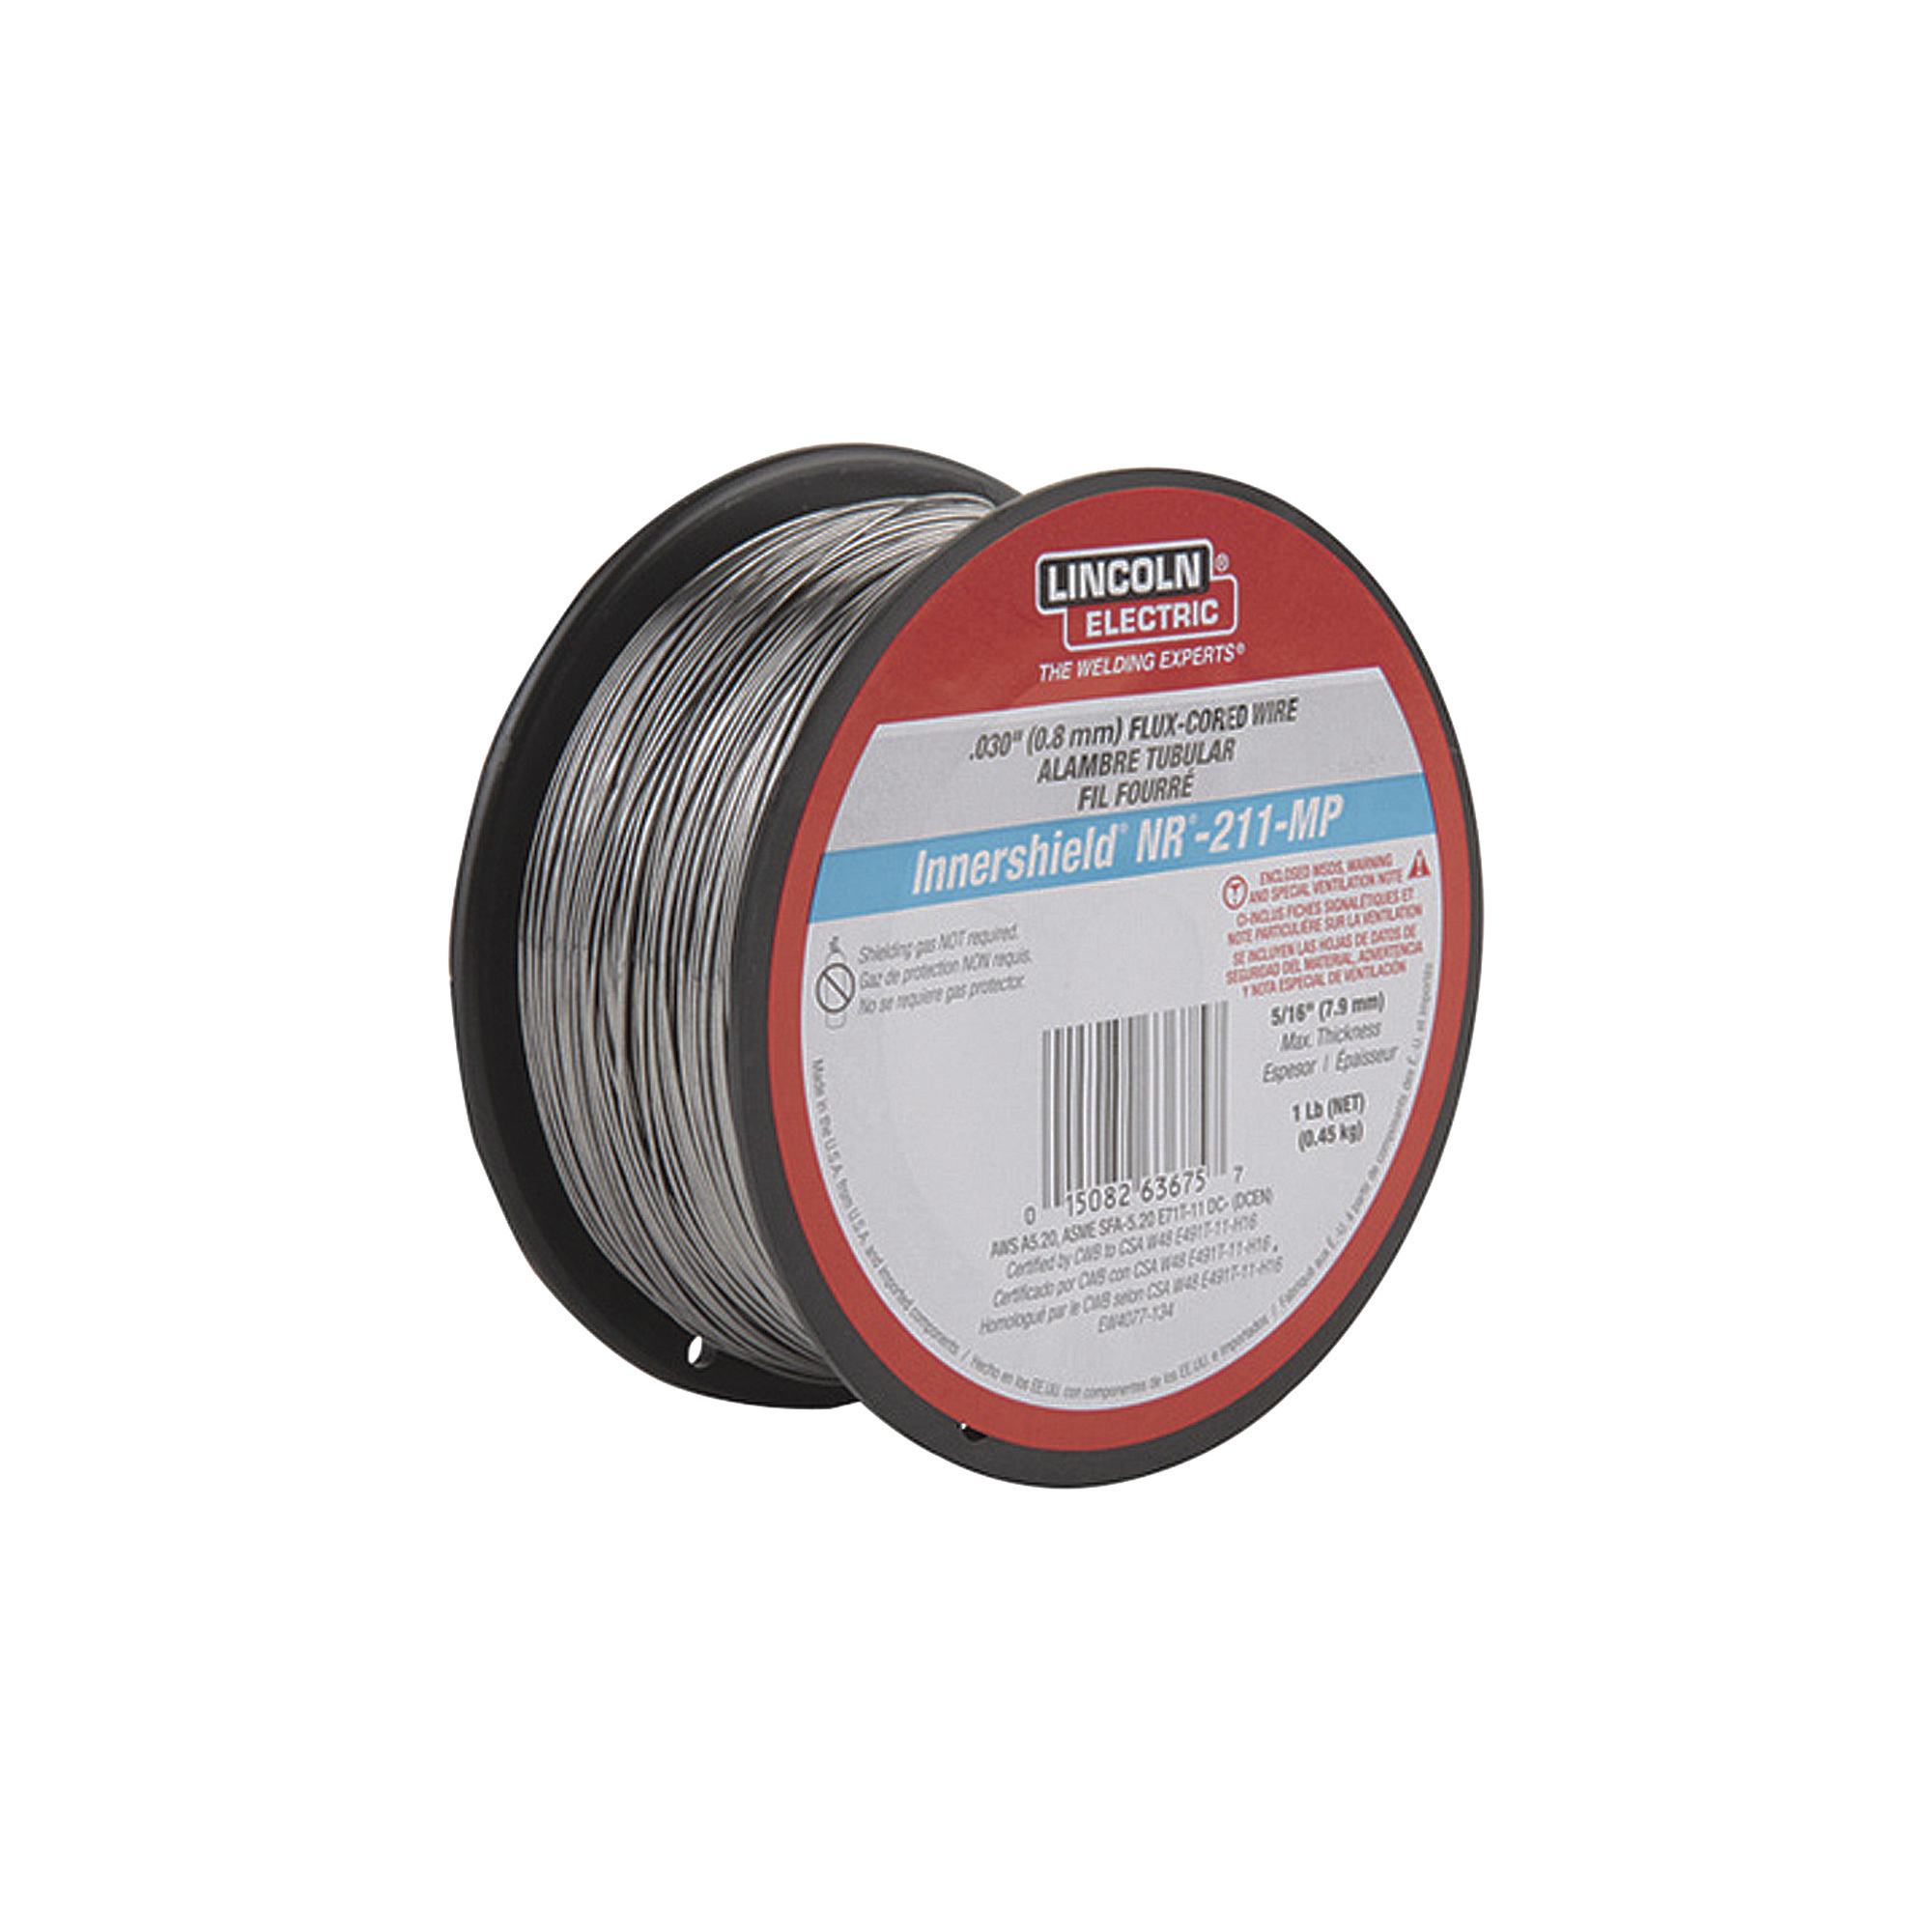 Lincoln Electric Innershield NR-211-MP Flux-Cored Welding Wire, Mild Steel, All Position, .030Inch, 1-Lb. Spool, Model ED031448